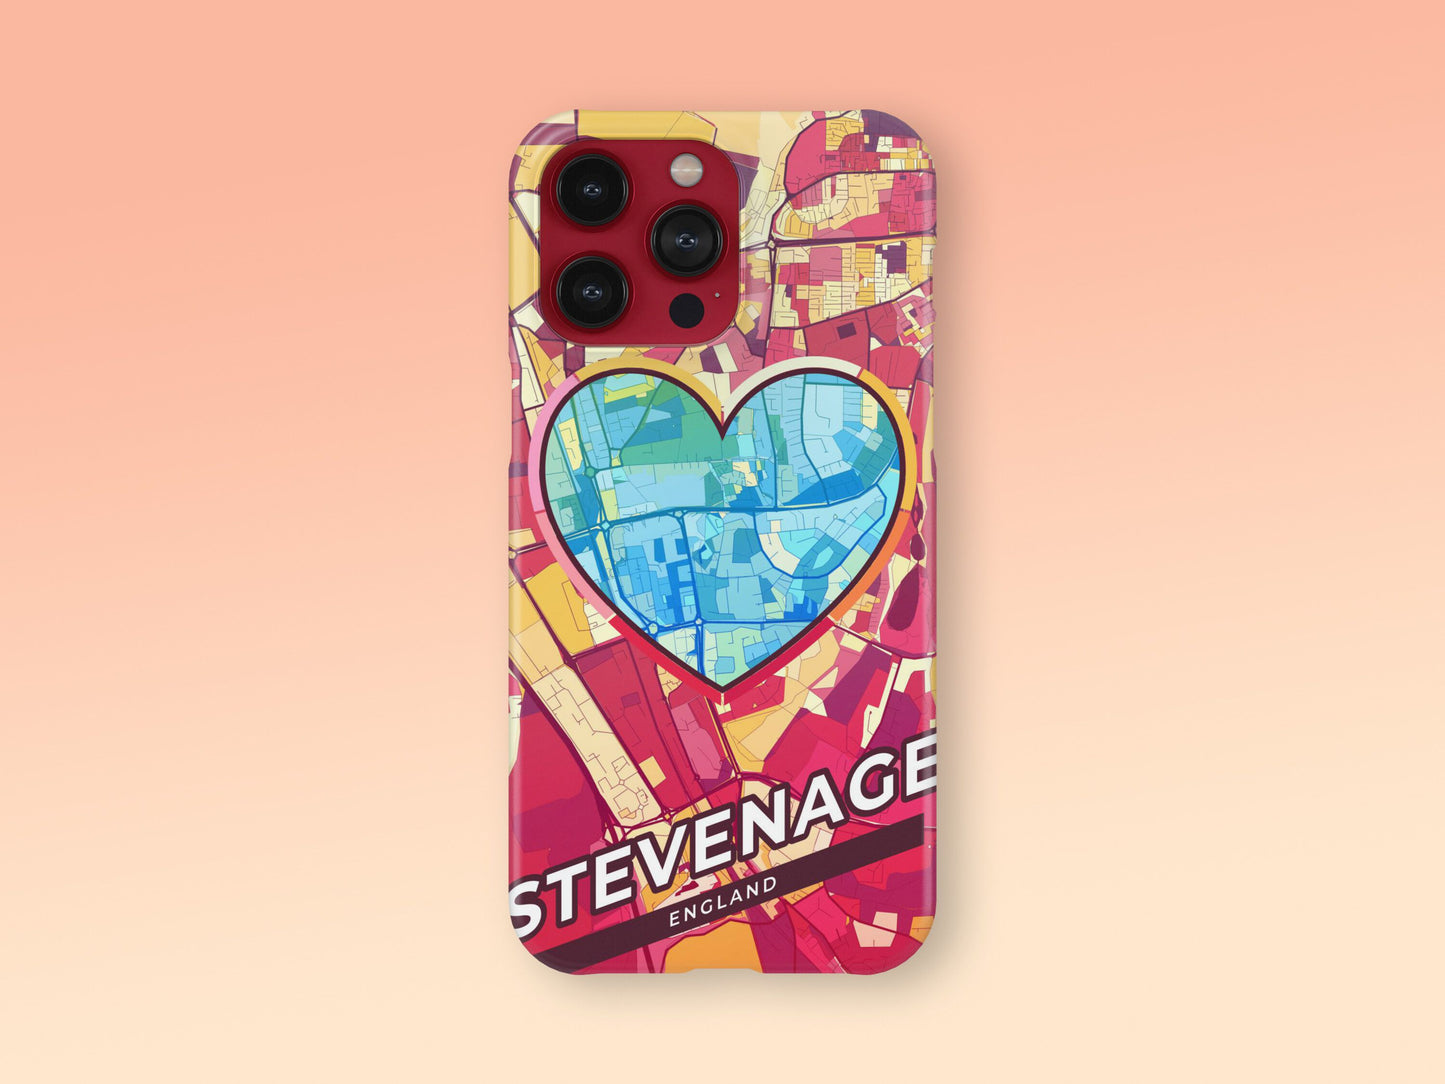 Stevenage England slim phone case with colorful icon 2